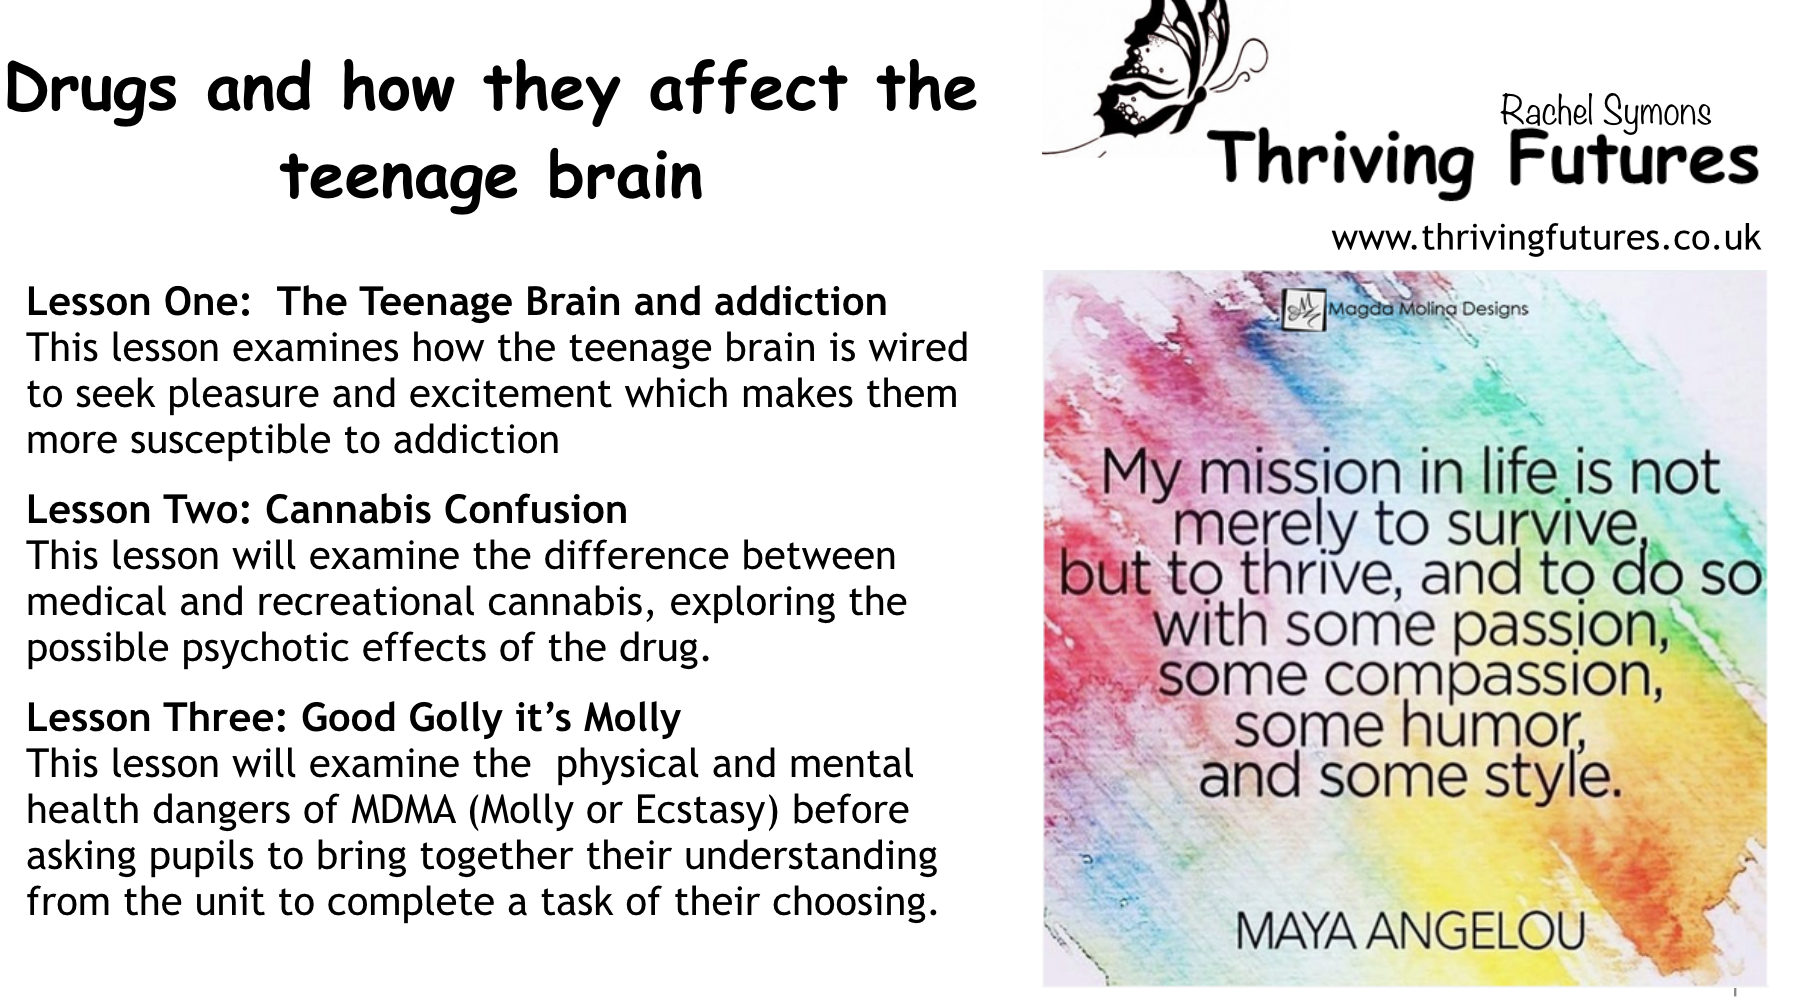 The effect of drugs on the teenage brain. featured image